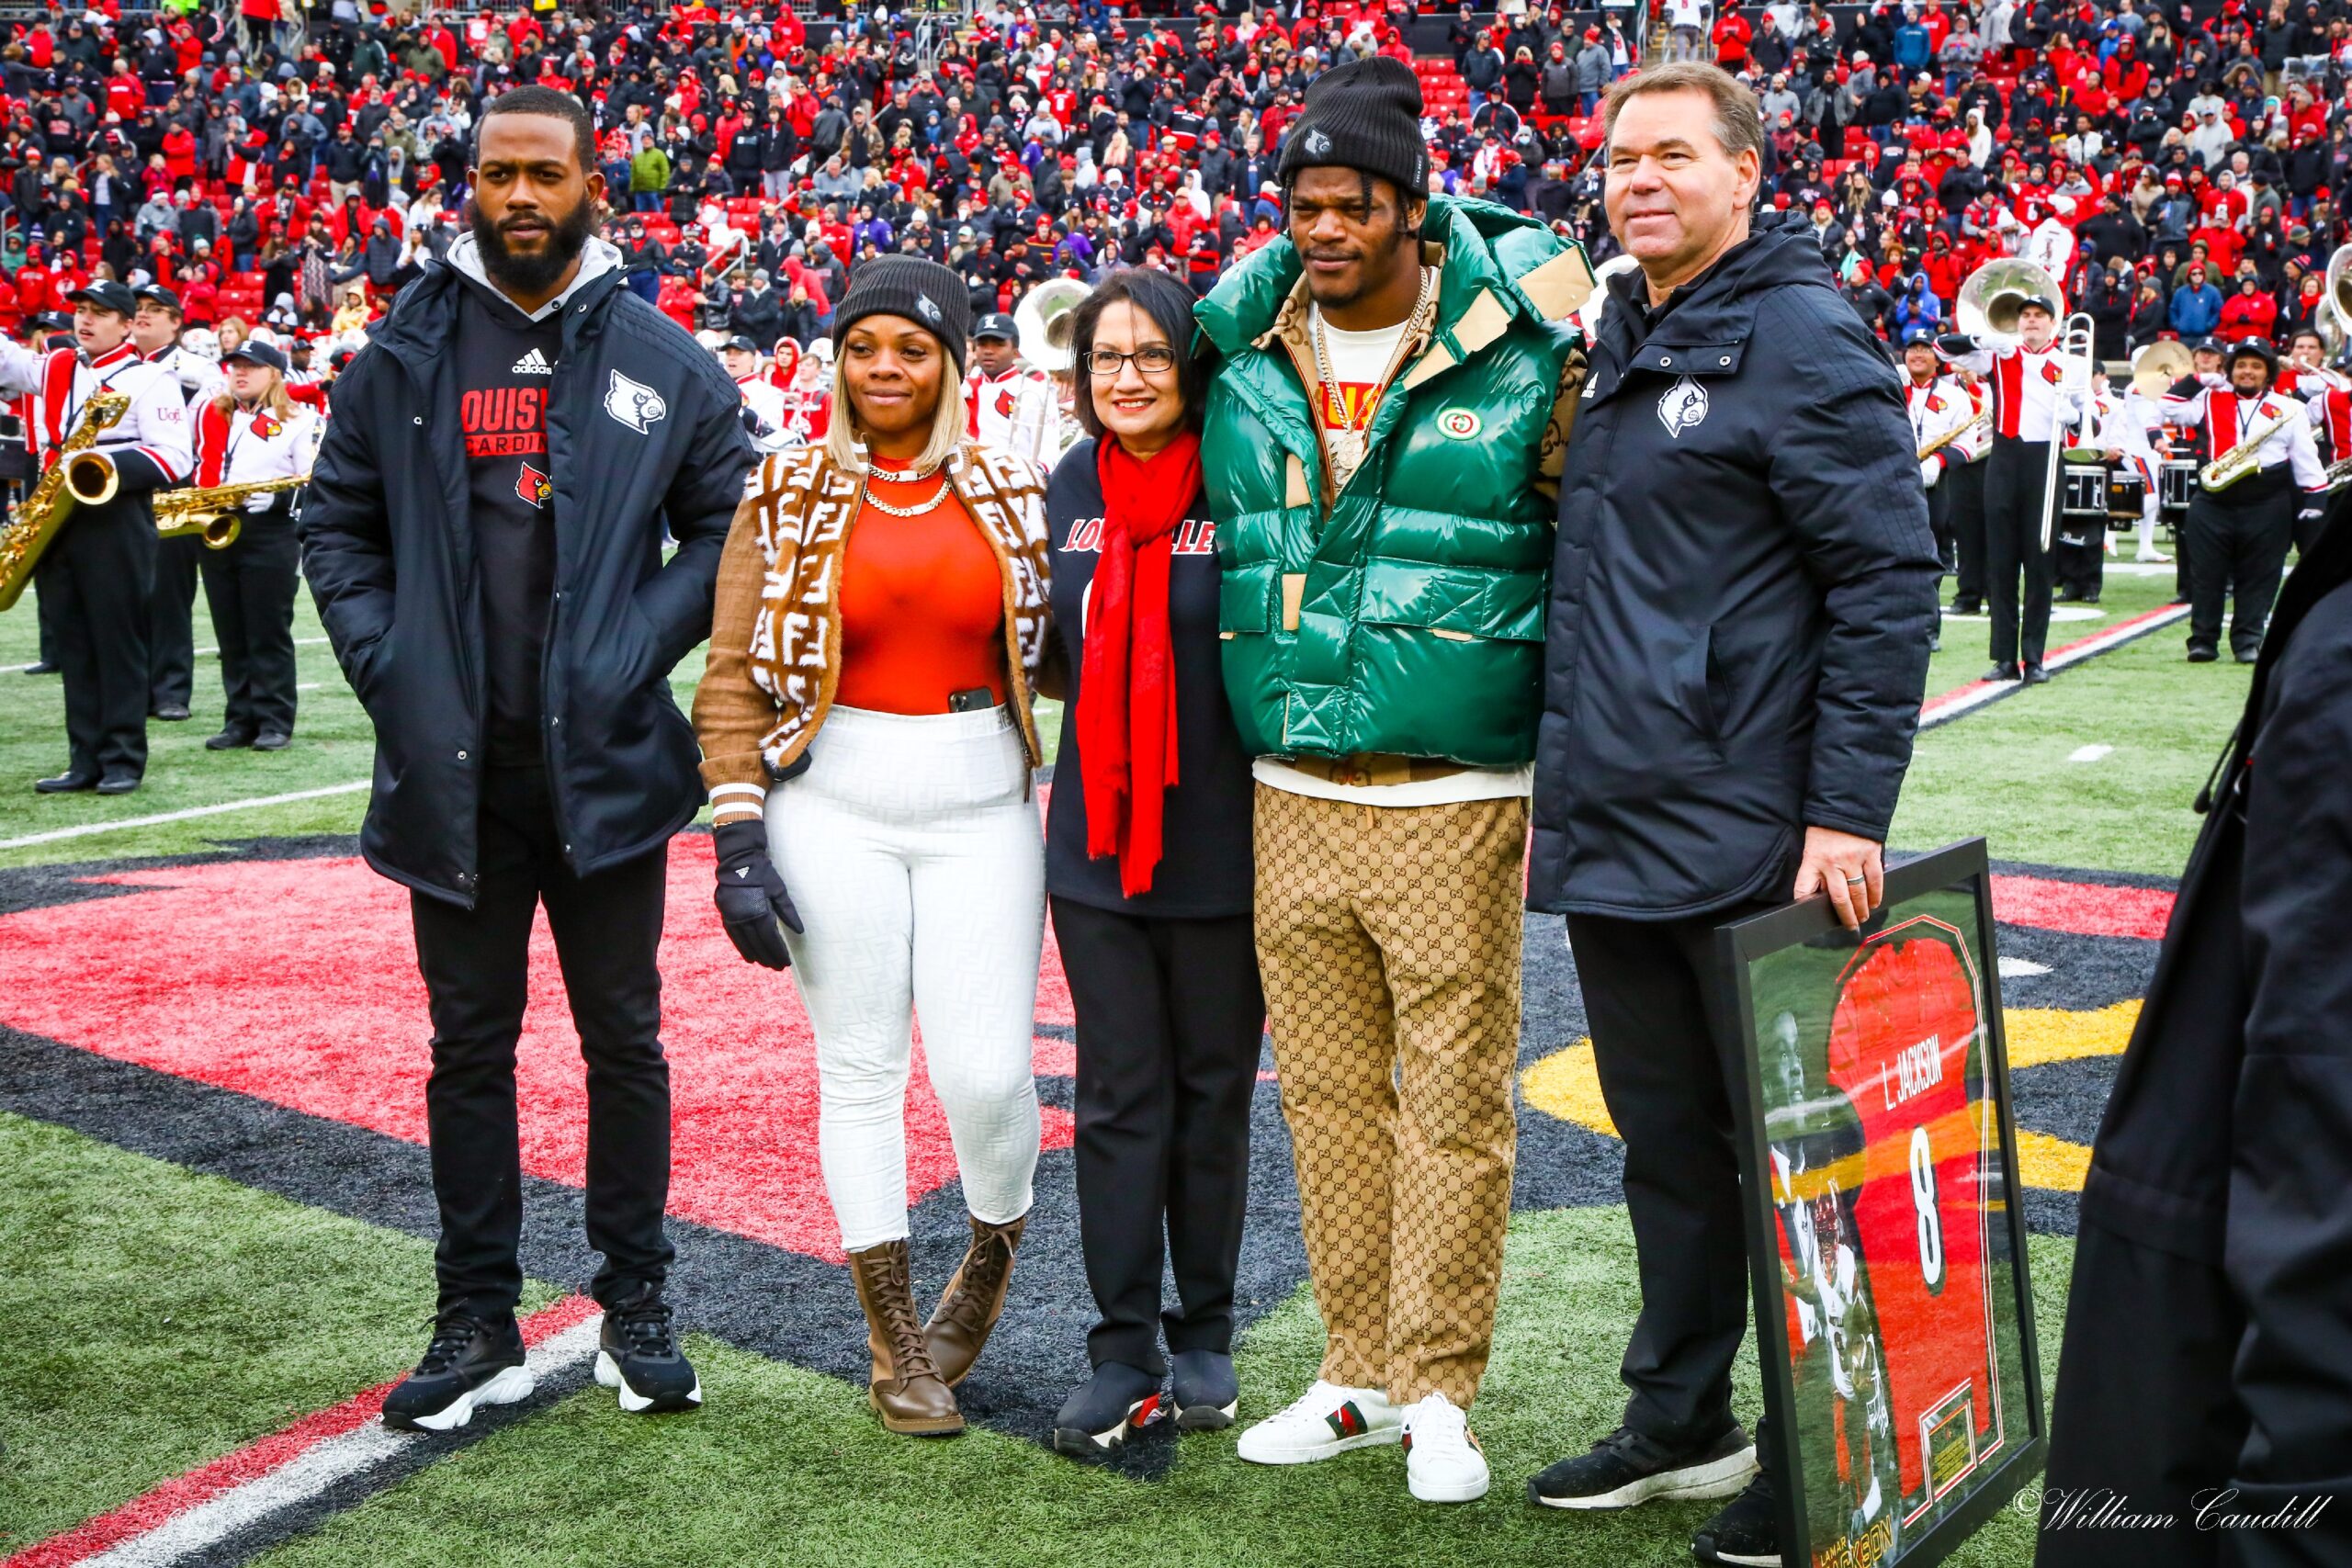 GALLERY: Lamar Jackson Jersey/Number Retirement Ceremony – The